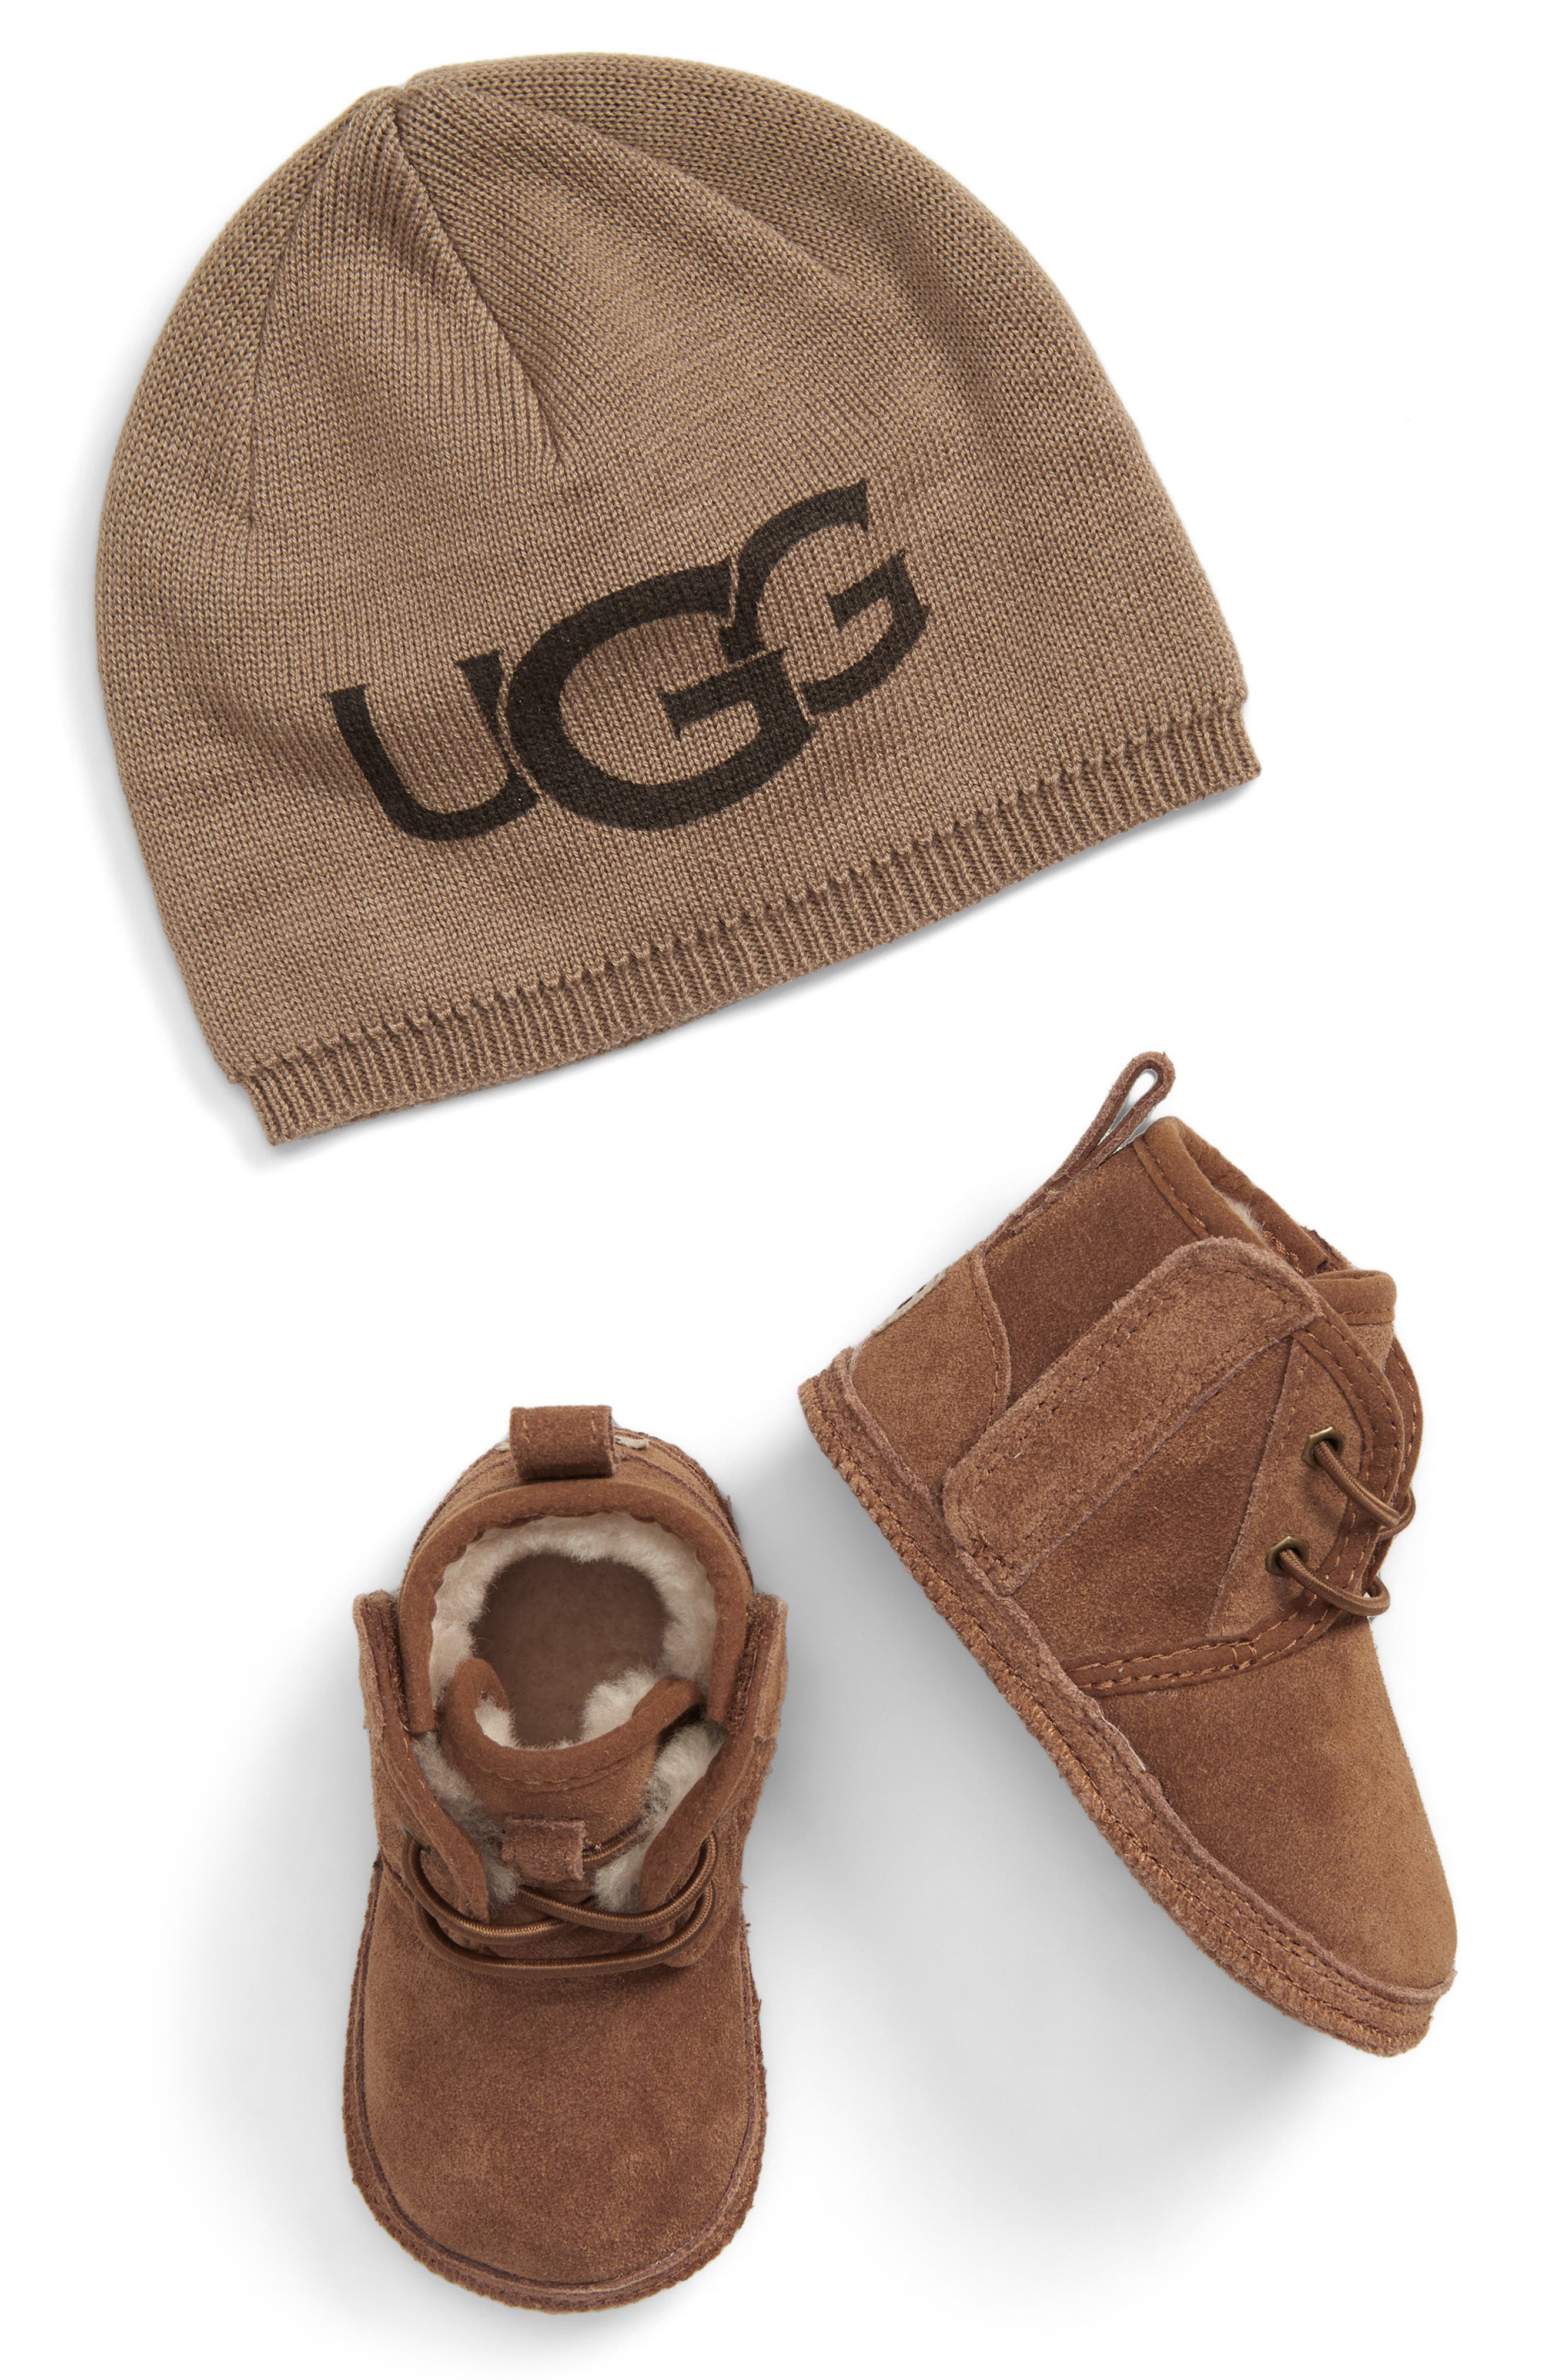 uggs for babies and toddlers